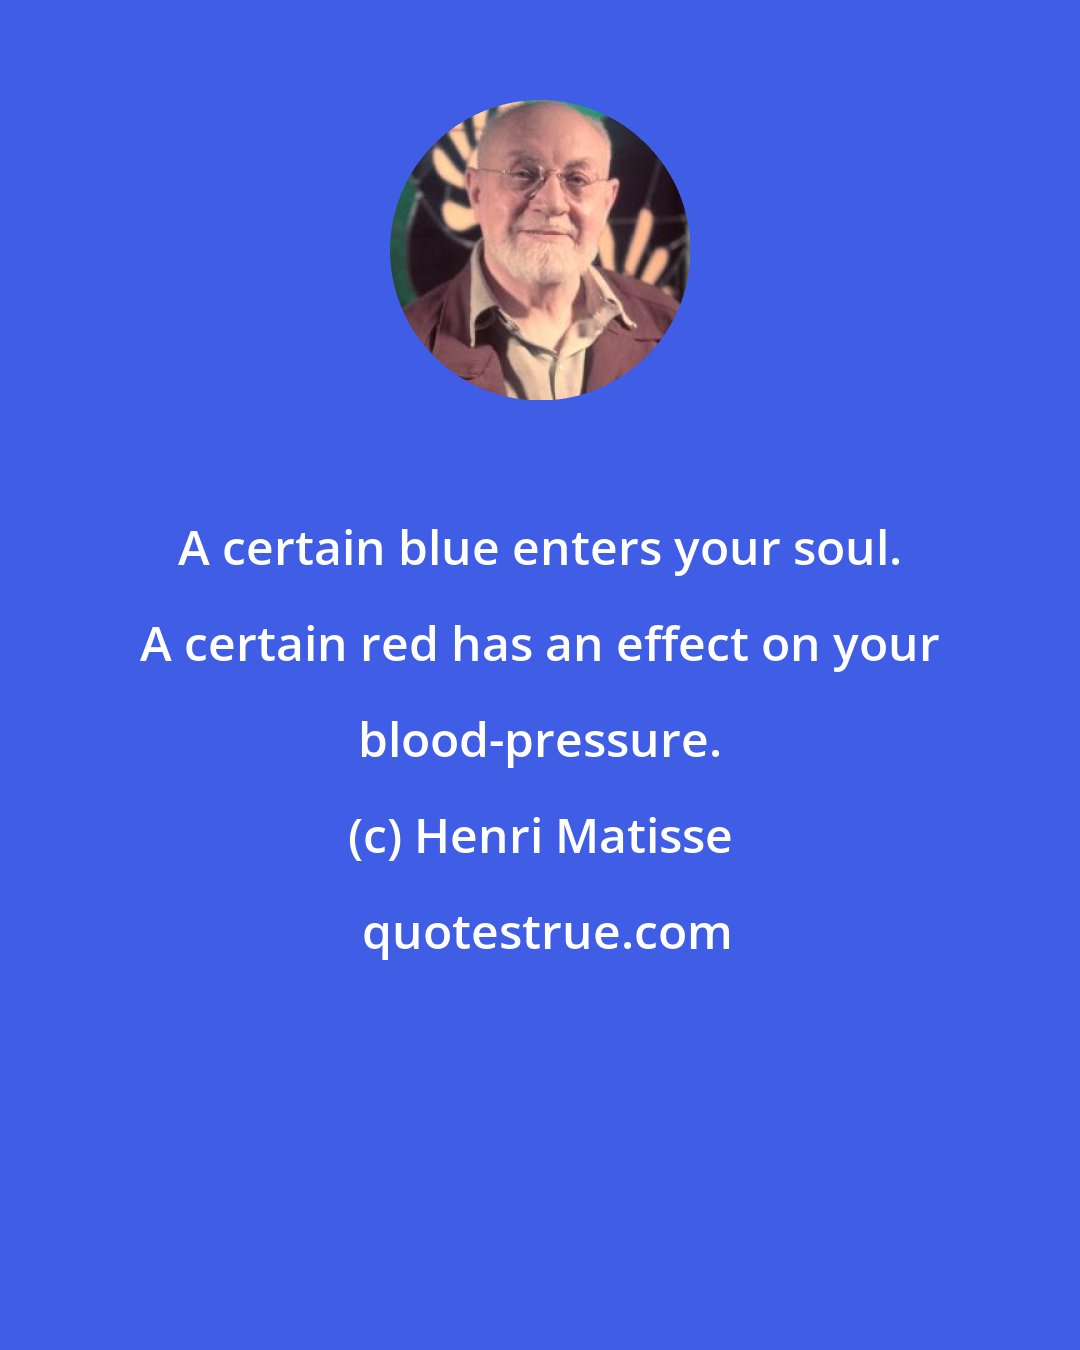 Henri Matisse: A certain blue enters your soul. A certain red has an effect on your blood-pressure.